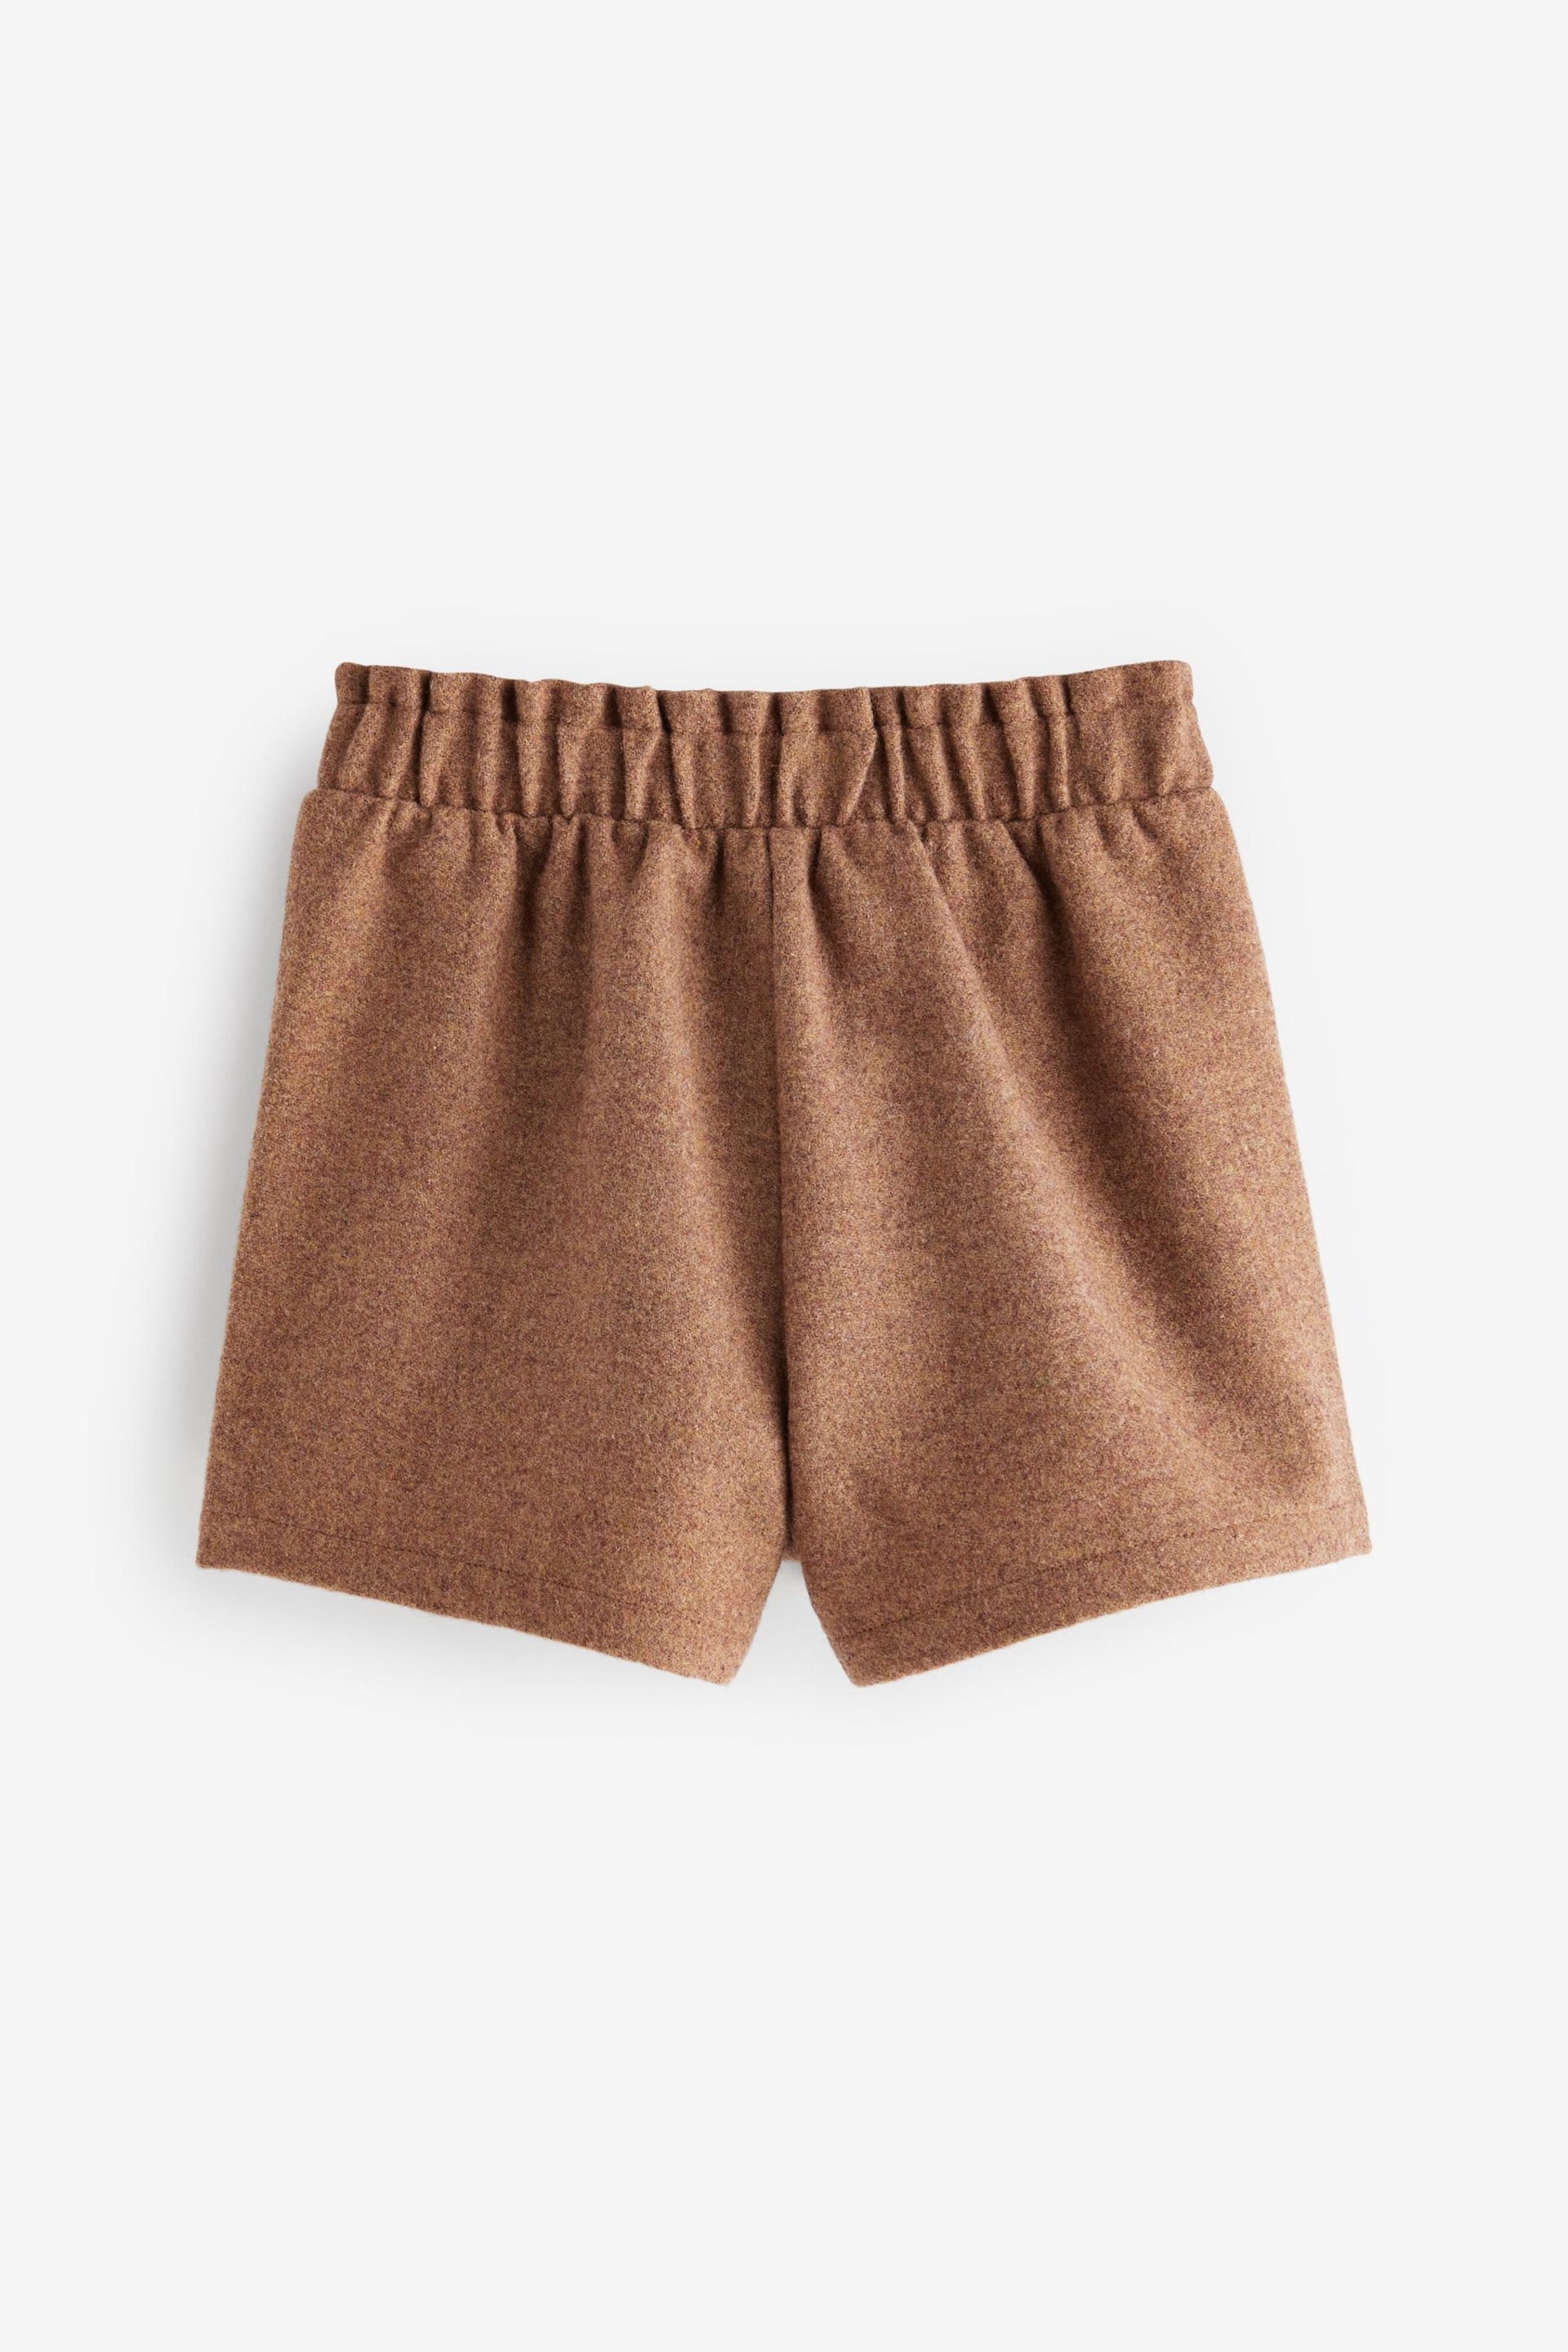 Rust Pull-on Shorts & Tights Set (3mths-7yrs) - Image 4 of 5